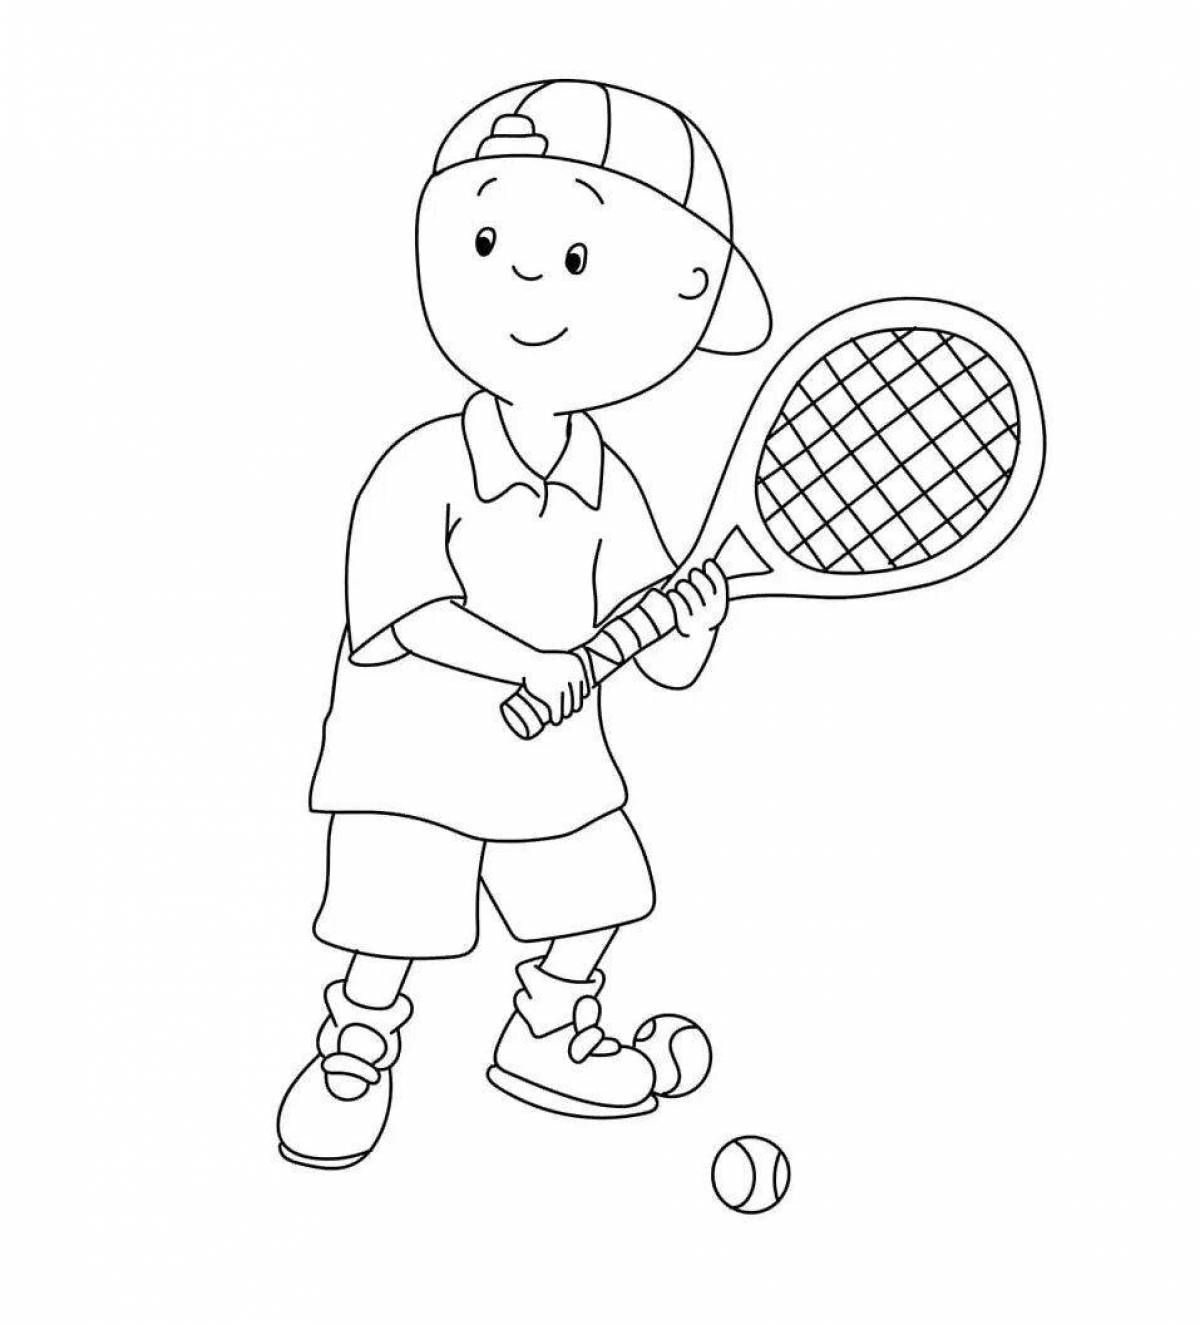 Adorable sports coloring book for kids 5-6 years old